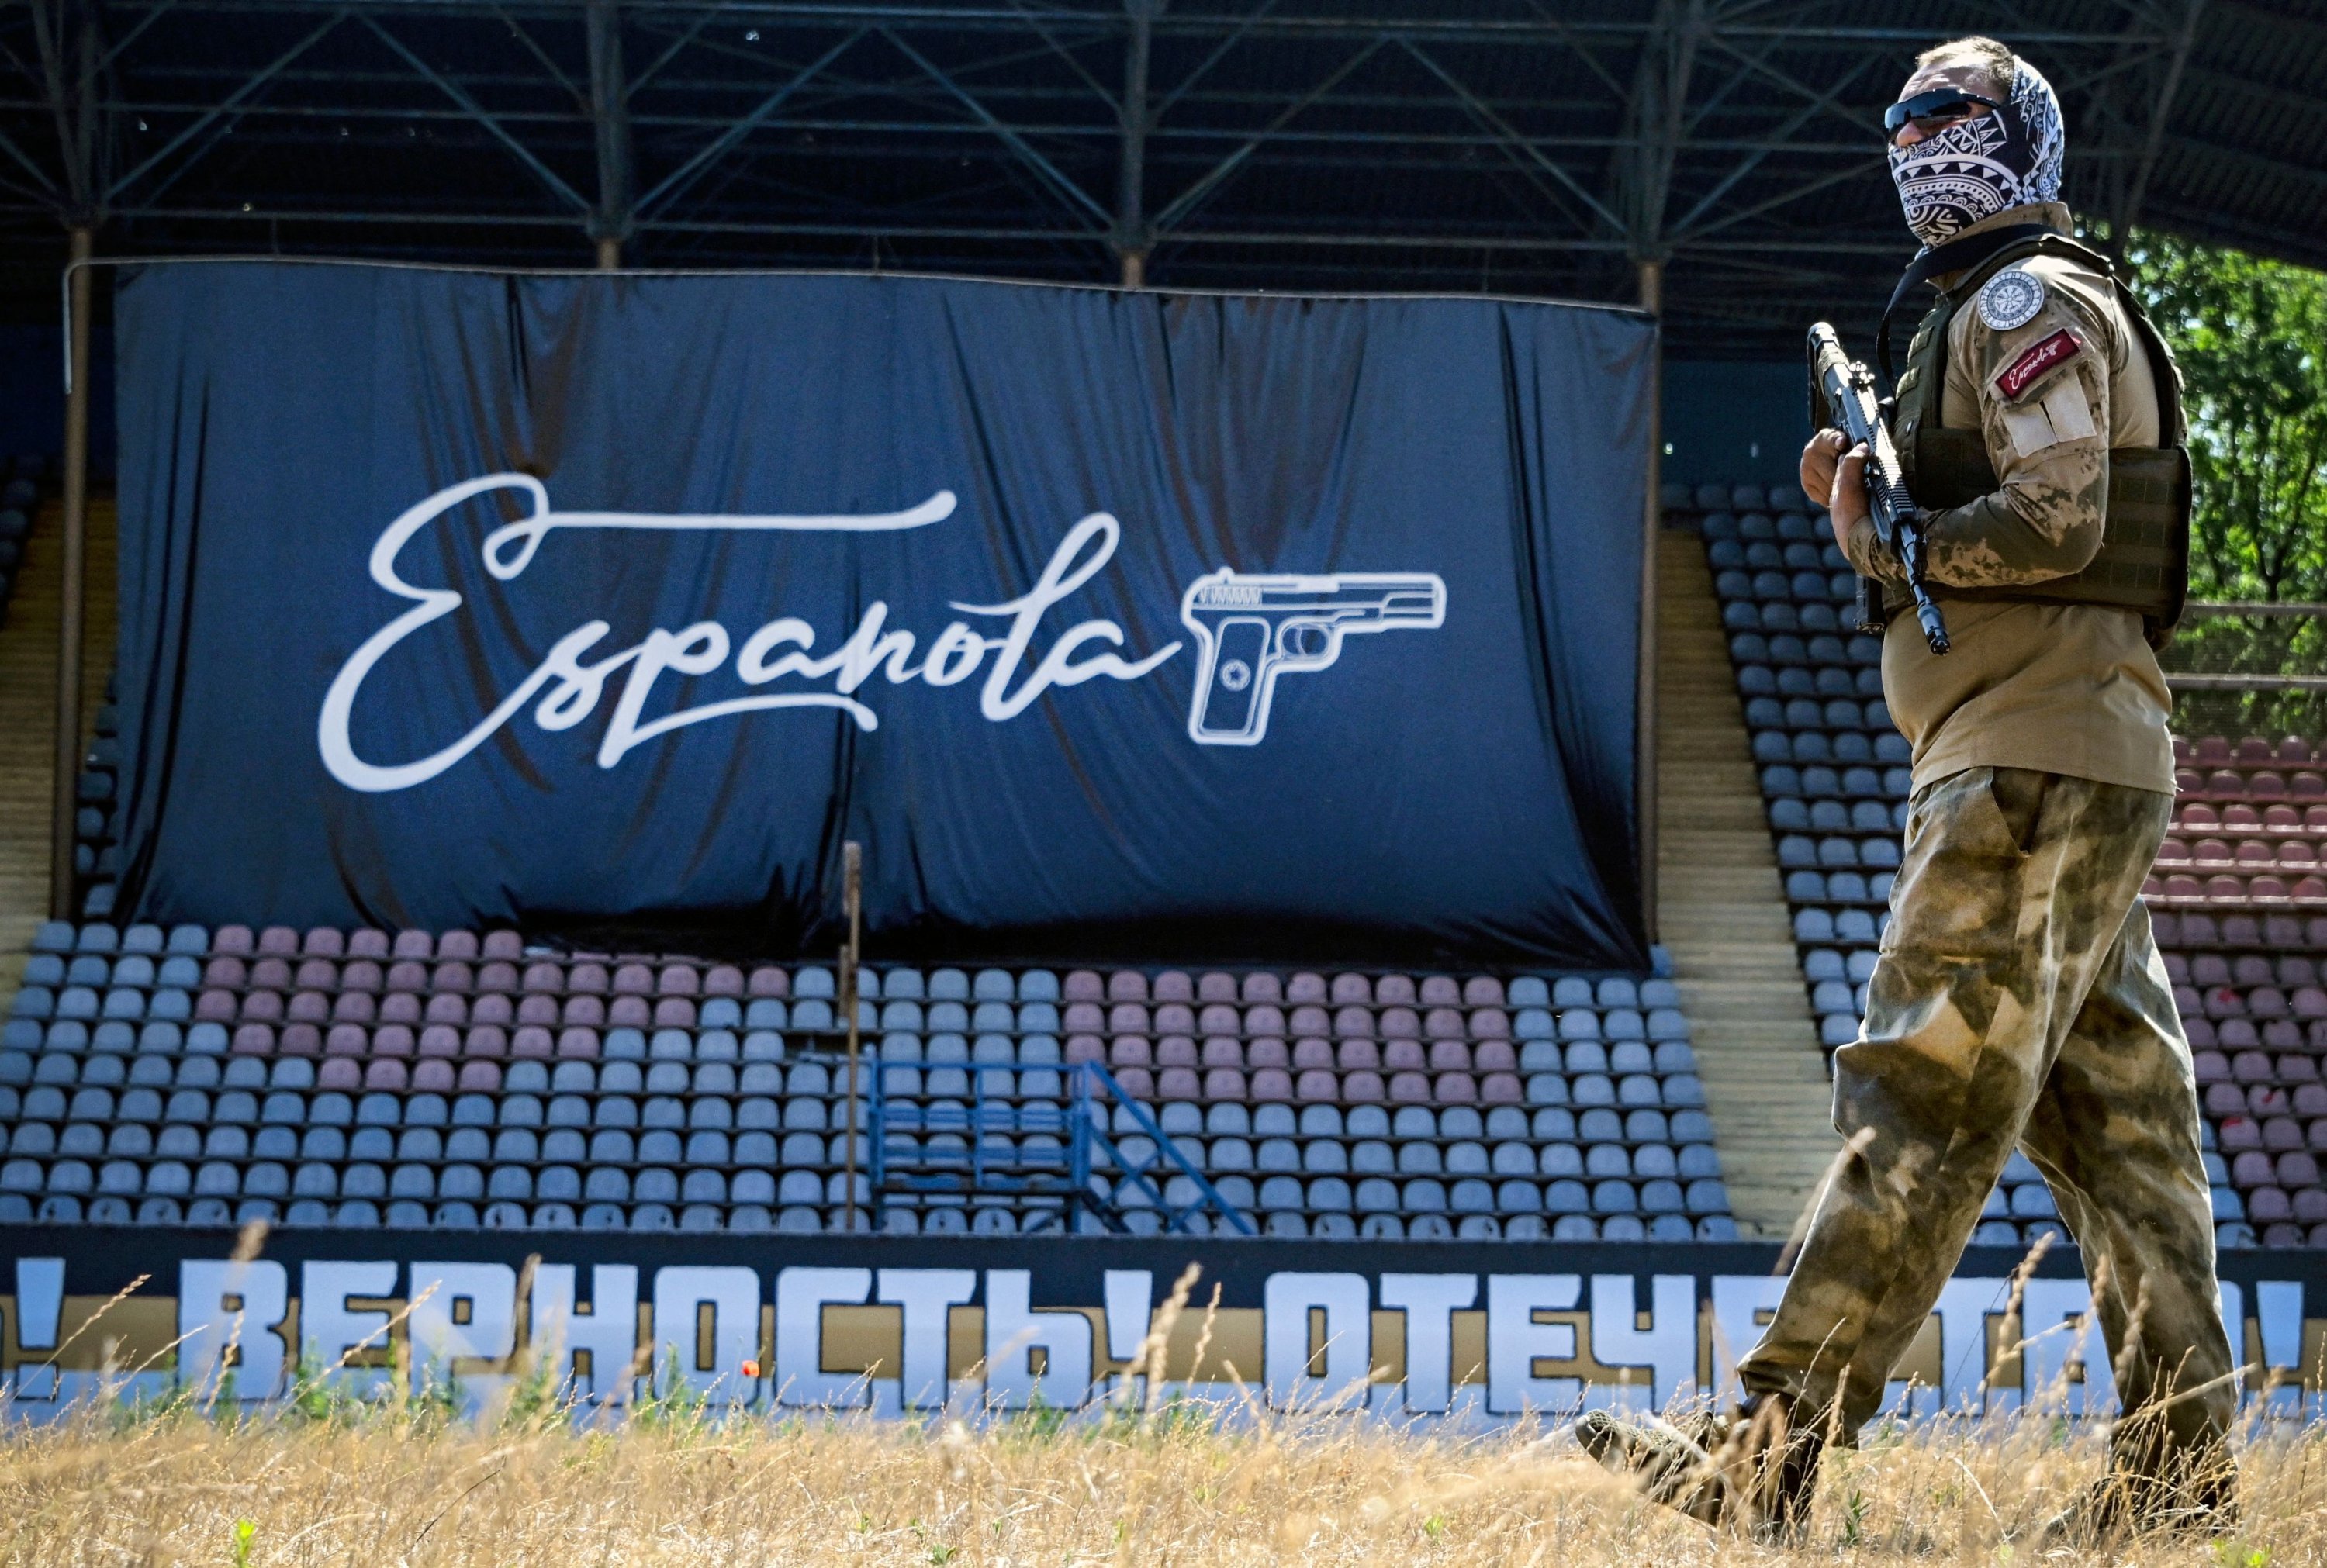 Battle on pitch: Russian football ultras take arms in Mariupol